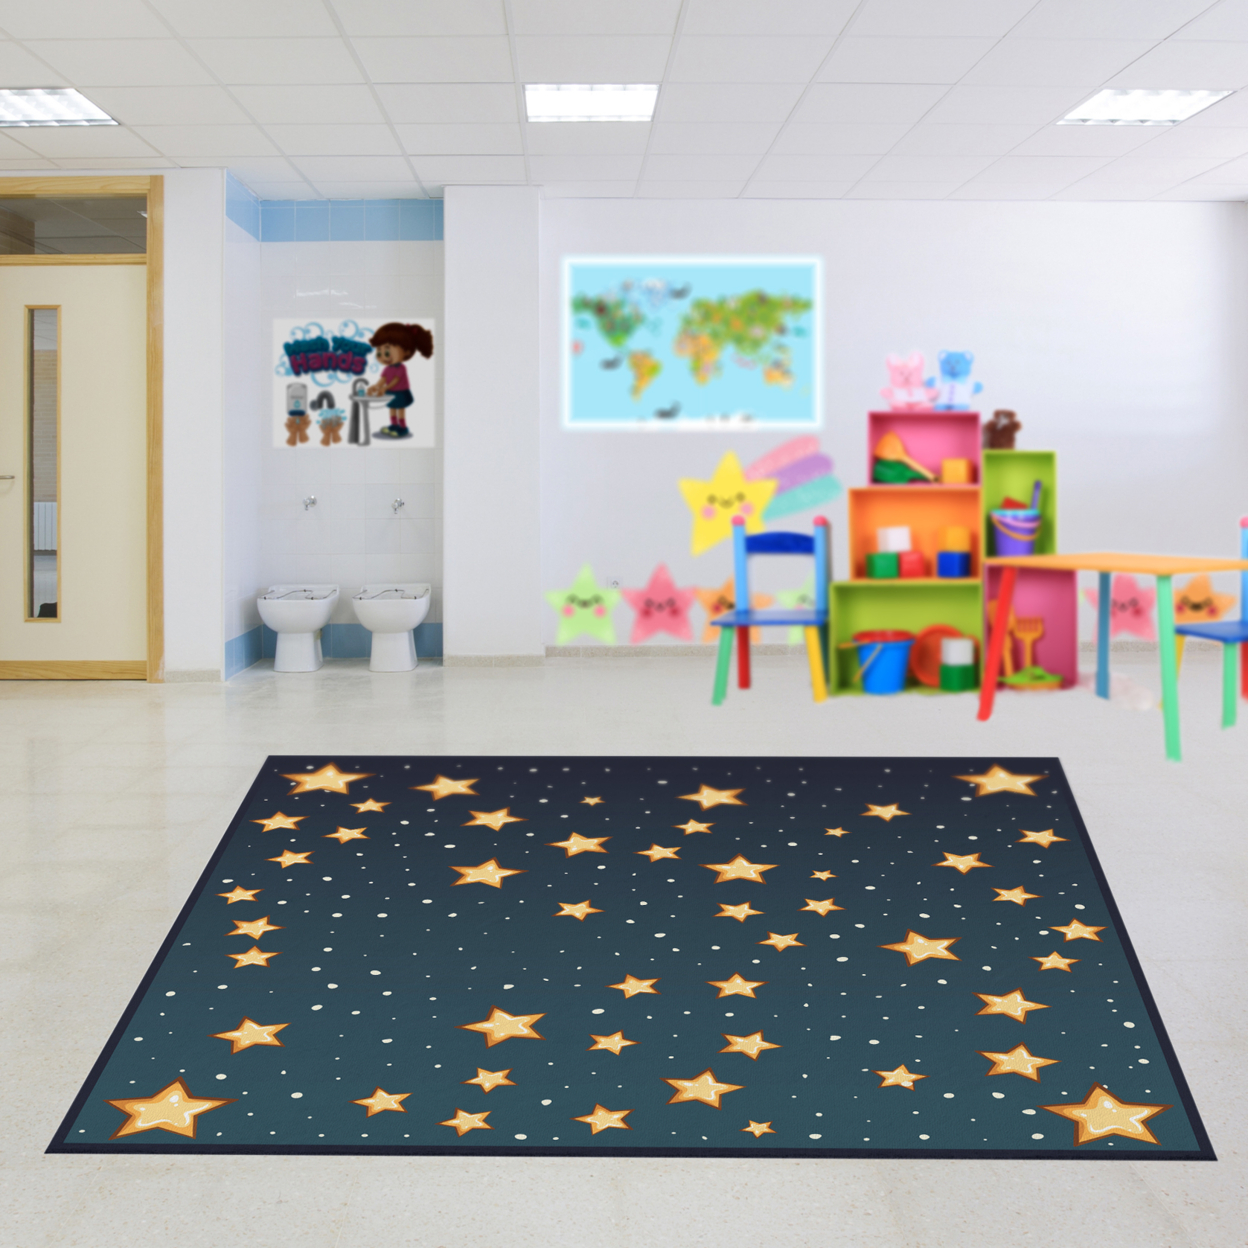 Deerlux 6 Ft. Social Distancing Colorful Kids Classroom Seating Area Rug, Starry Sky Design - Large